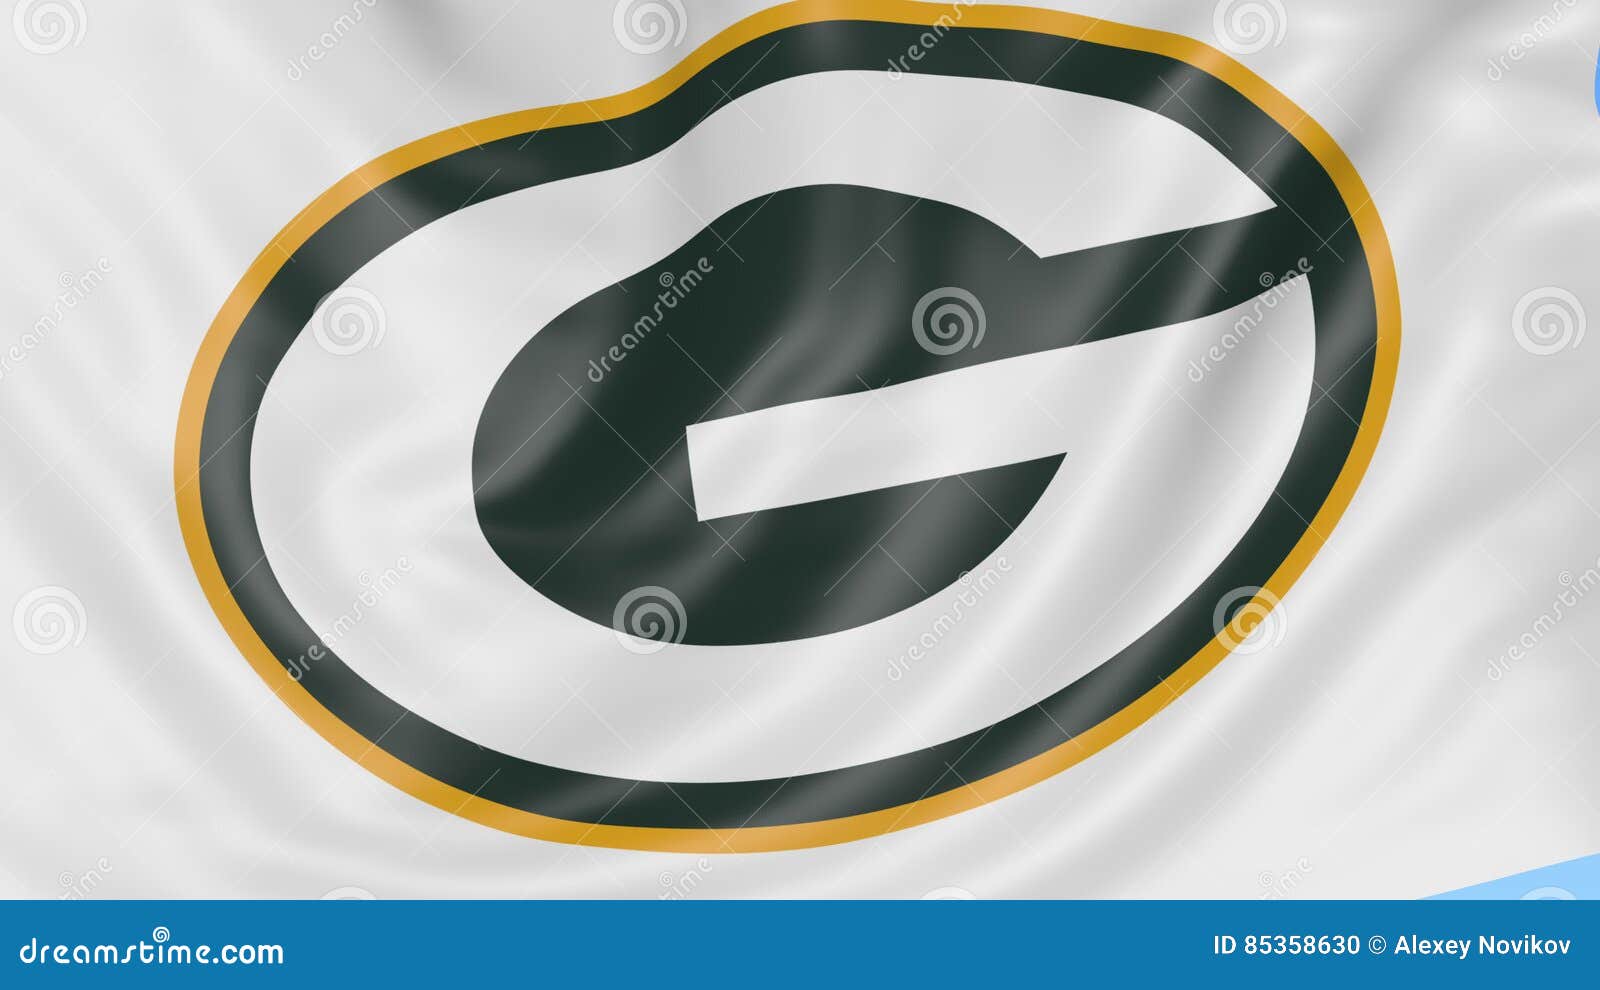 packers logo green background